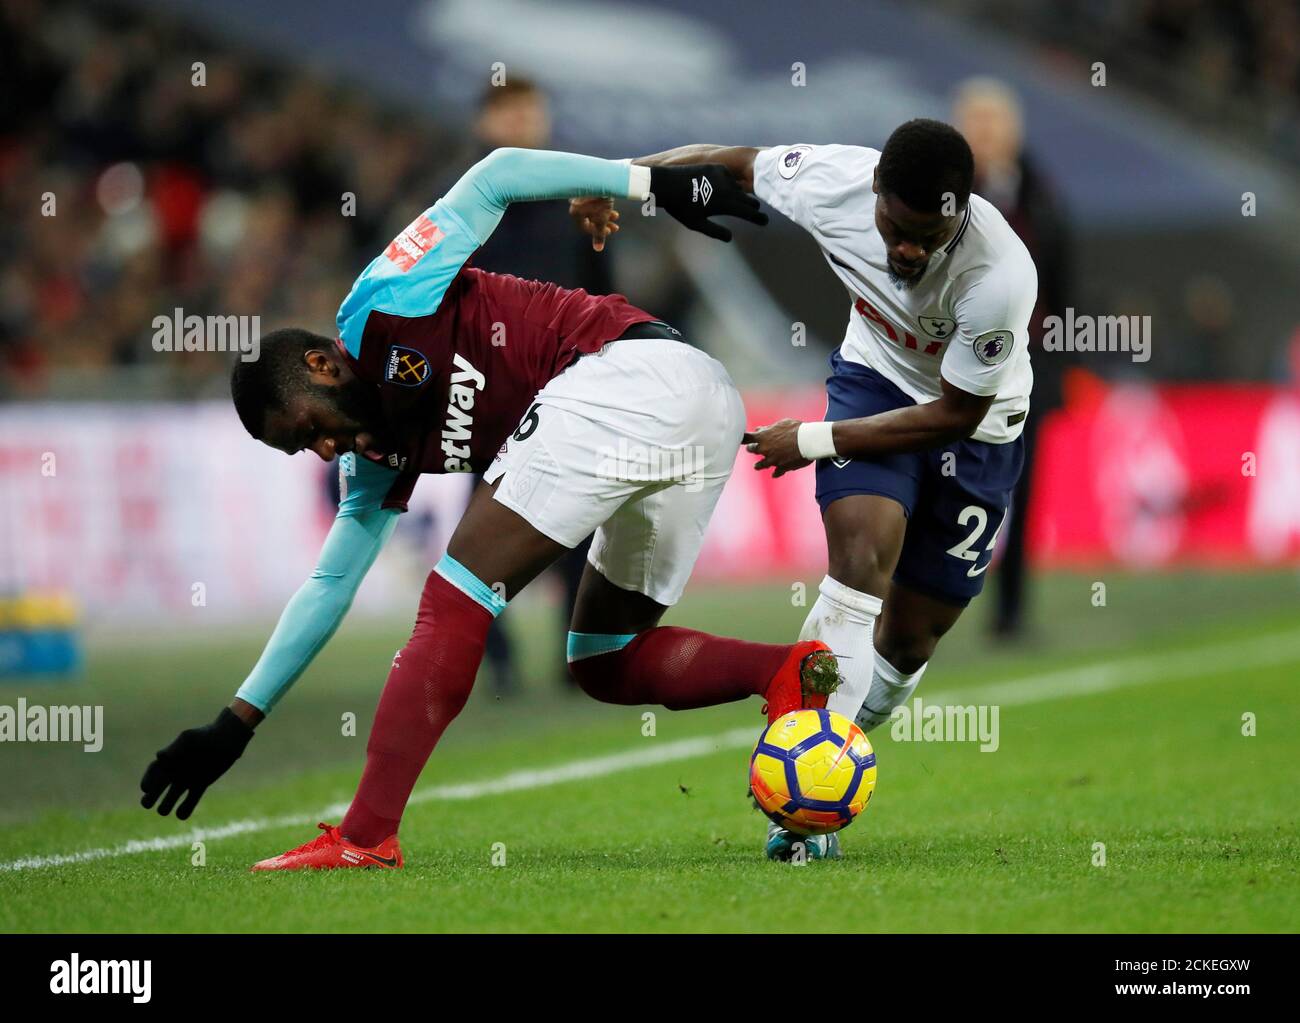 Soccer Football - Premier League - Tottenham Hotspur vs West Ham United - Wembley Stadium, London, Britain - January 4, 2018   Tottenham's Serge Aurier in action with West Ham United's Arthur Masuaku    REUTERS/Eddie Keogh    EDITORIAL USE ONLY. No use with unauthorized audio, video, data, fixture lists, club/league logos or 'live' services. Online in-match use limited to 75 images, no video emulation. No use in betting, games or single club/league/player publications.  Please contact your account representative for further details. Stock Photo